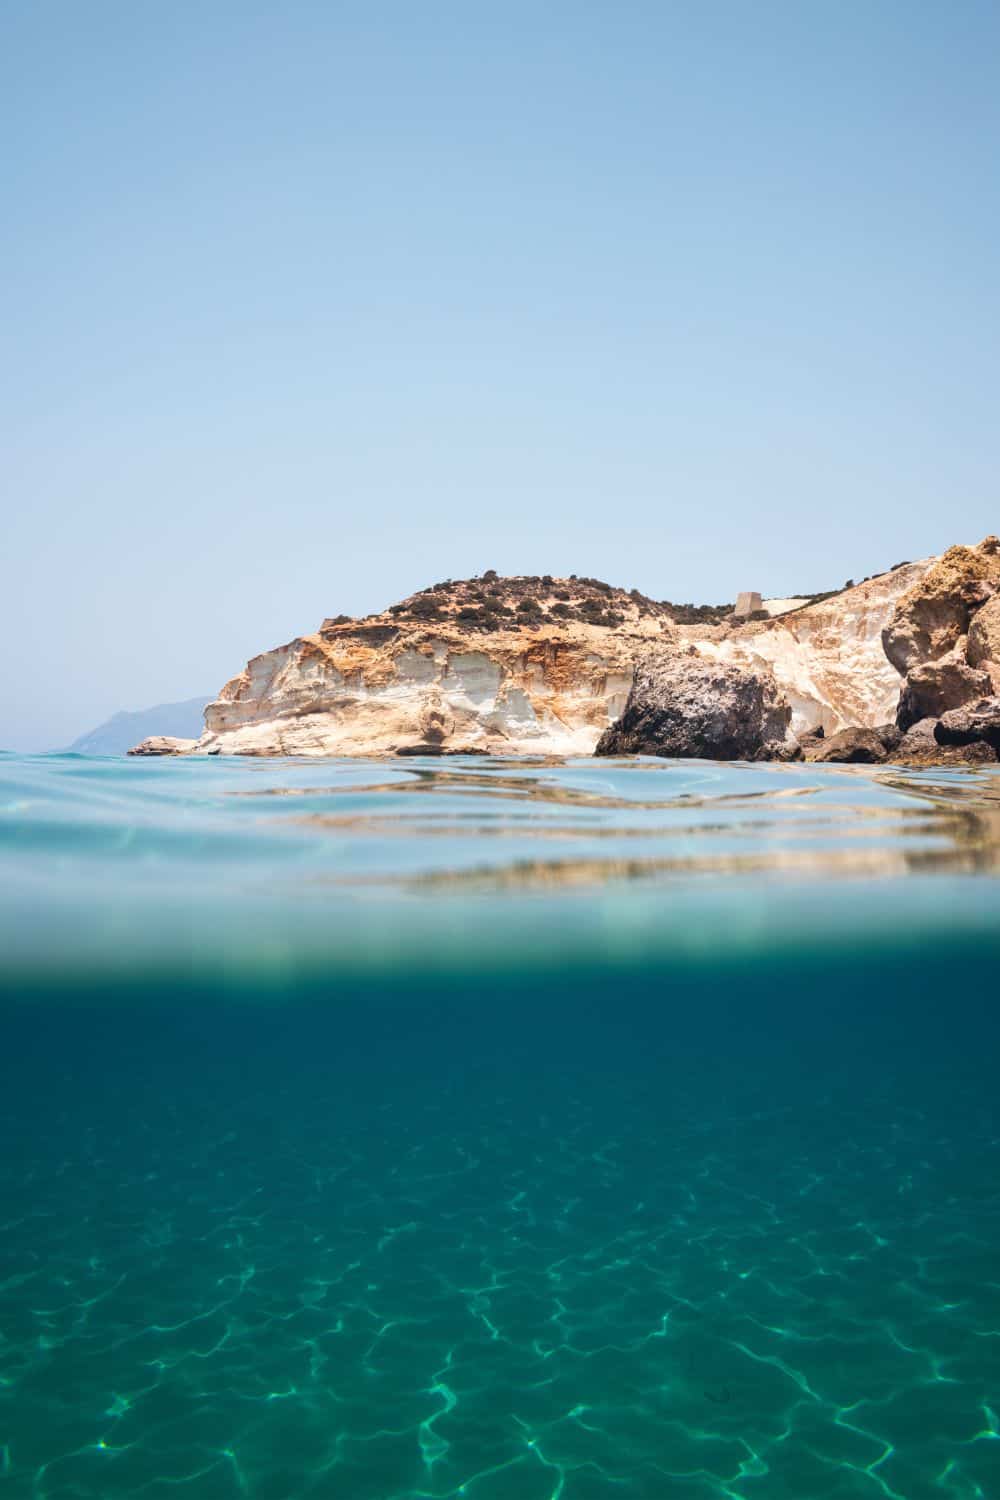 A reason Milos is worth visiting, the beaches. An underwater perspective half-submerged, showing the crystal-clear waters of Milos and the rocky landscape above, with a clear sky. This split view captures the dual beauty of Milos, both above and below the sea.